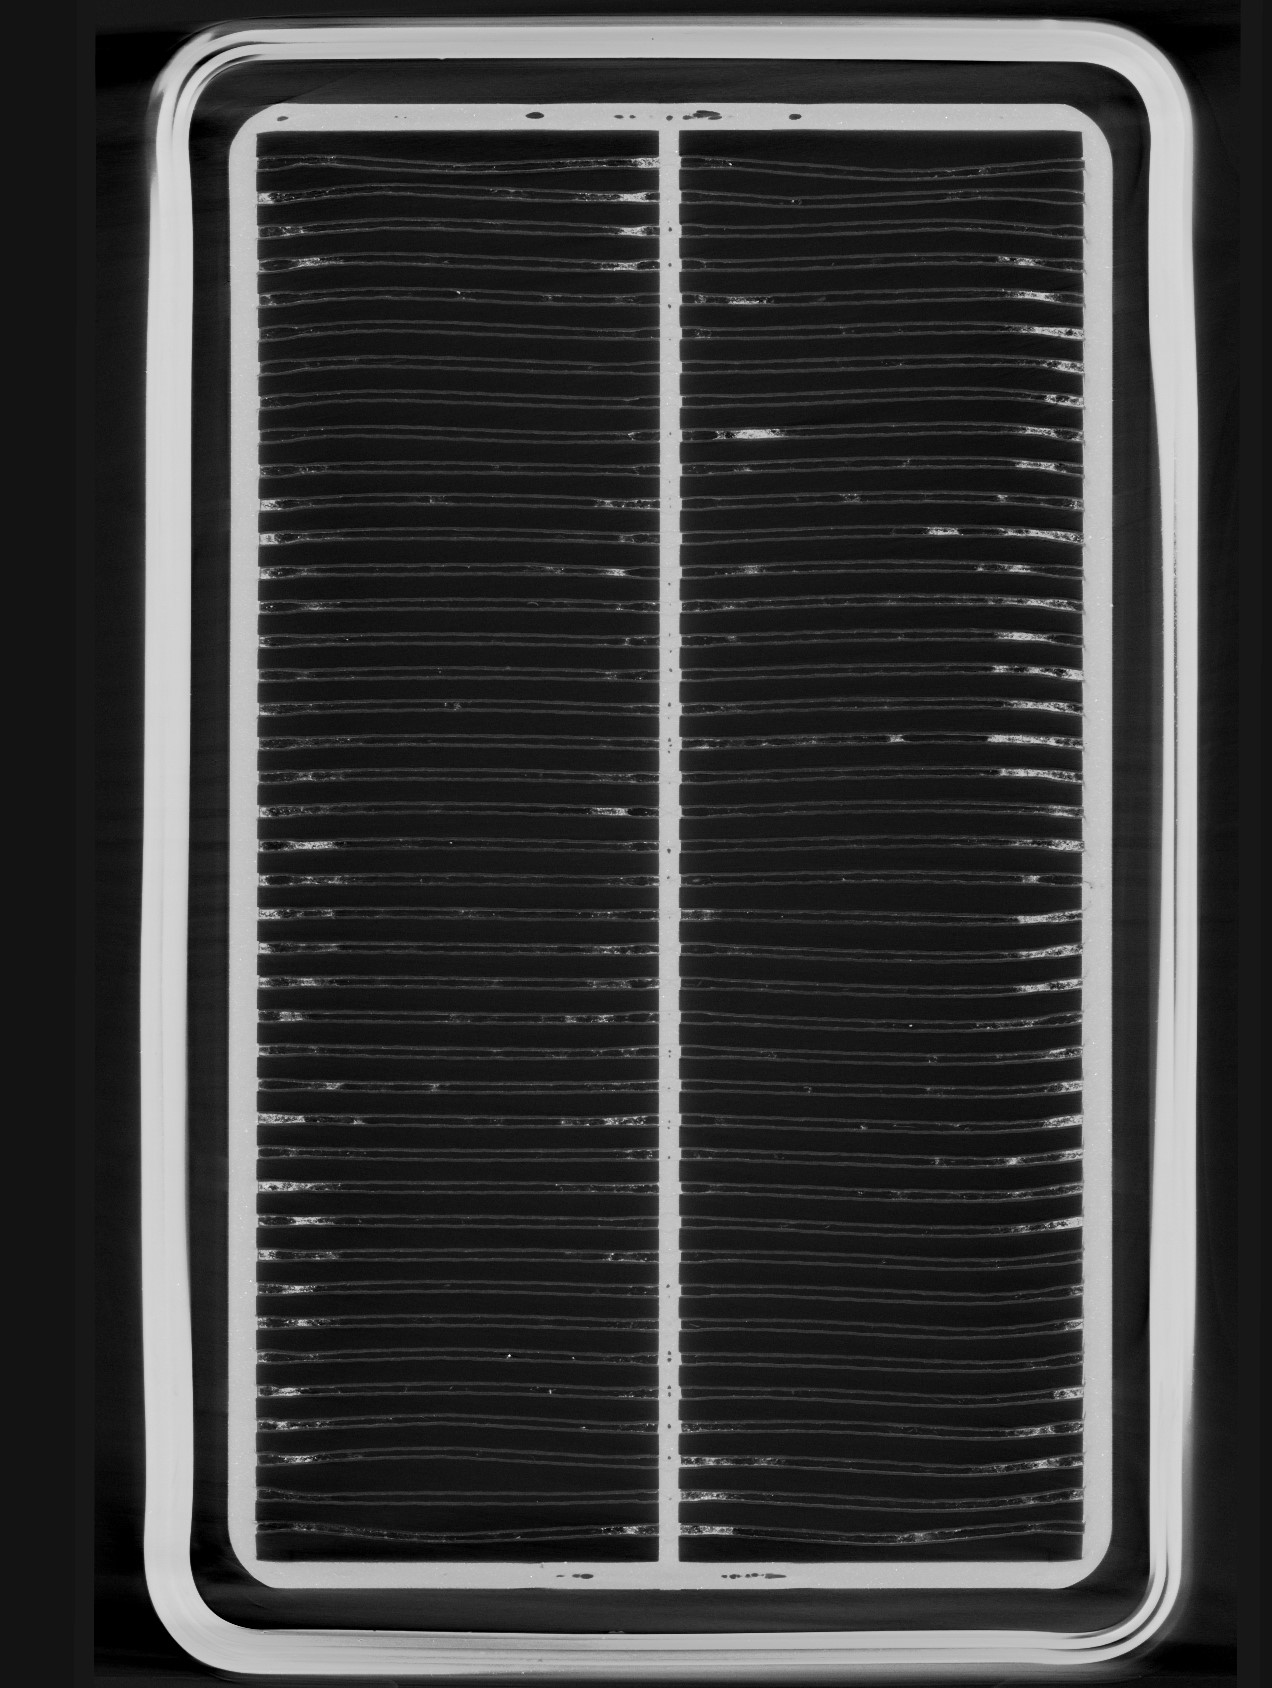 Scan of a used air filter where you can clearly see the impurities